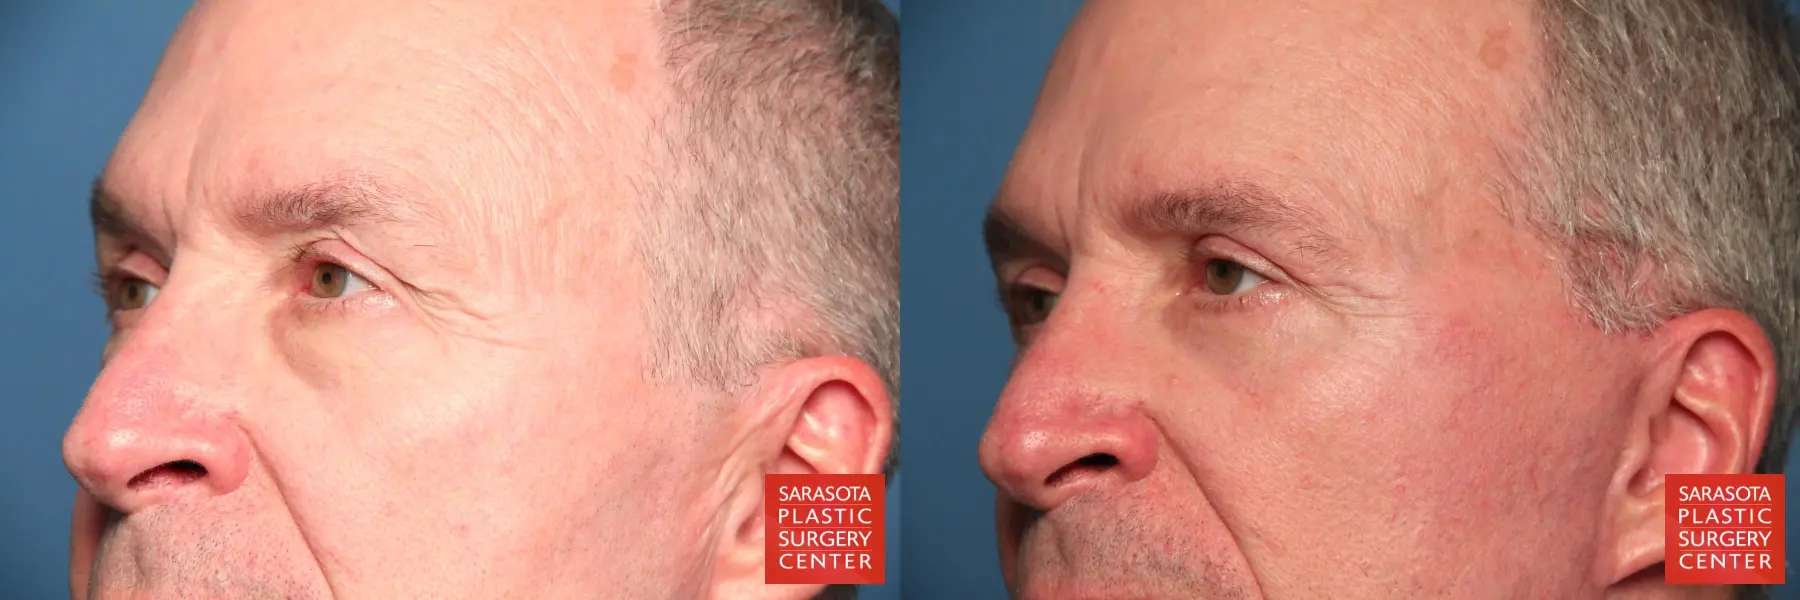 Eyelid Lift For Men: Patient 2 - Before and After 4